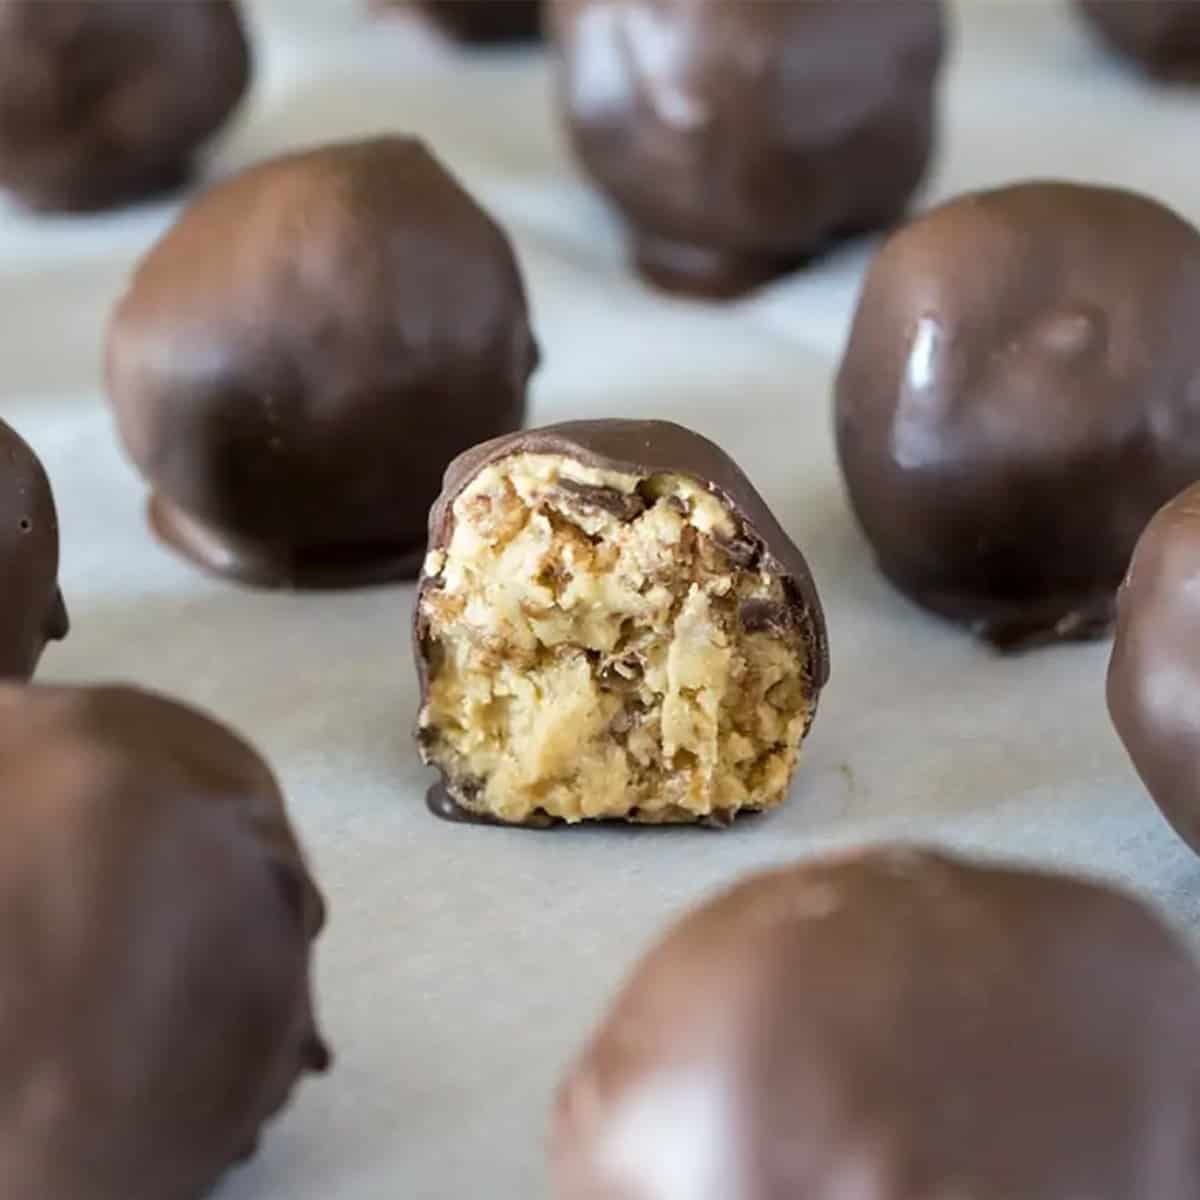 A bunch of peanut butter balls with a bite taken out of one of them.